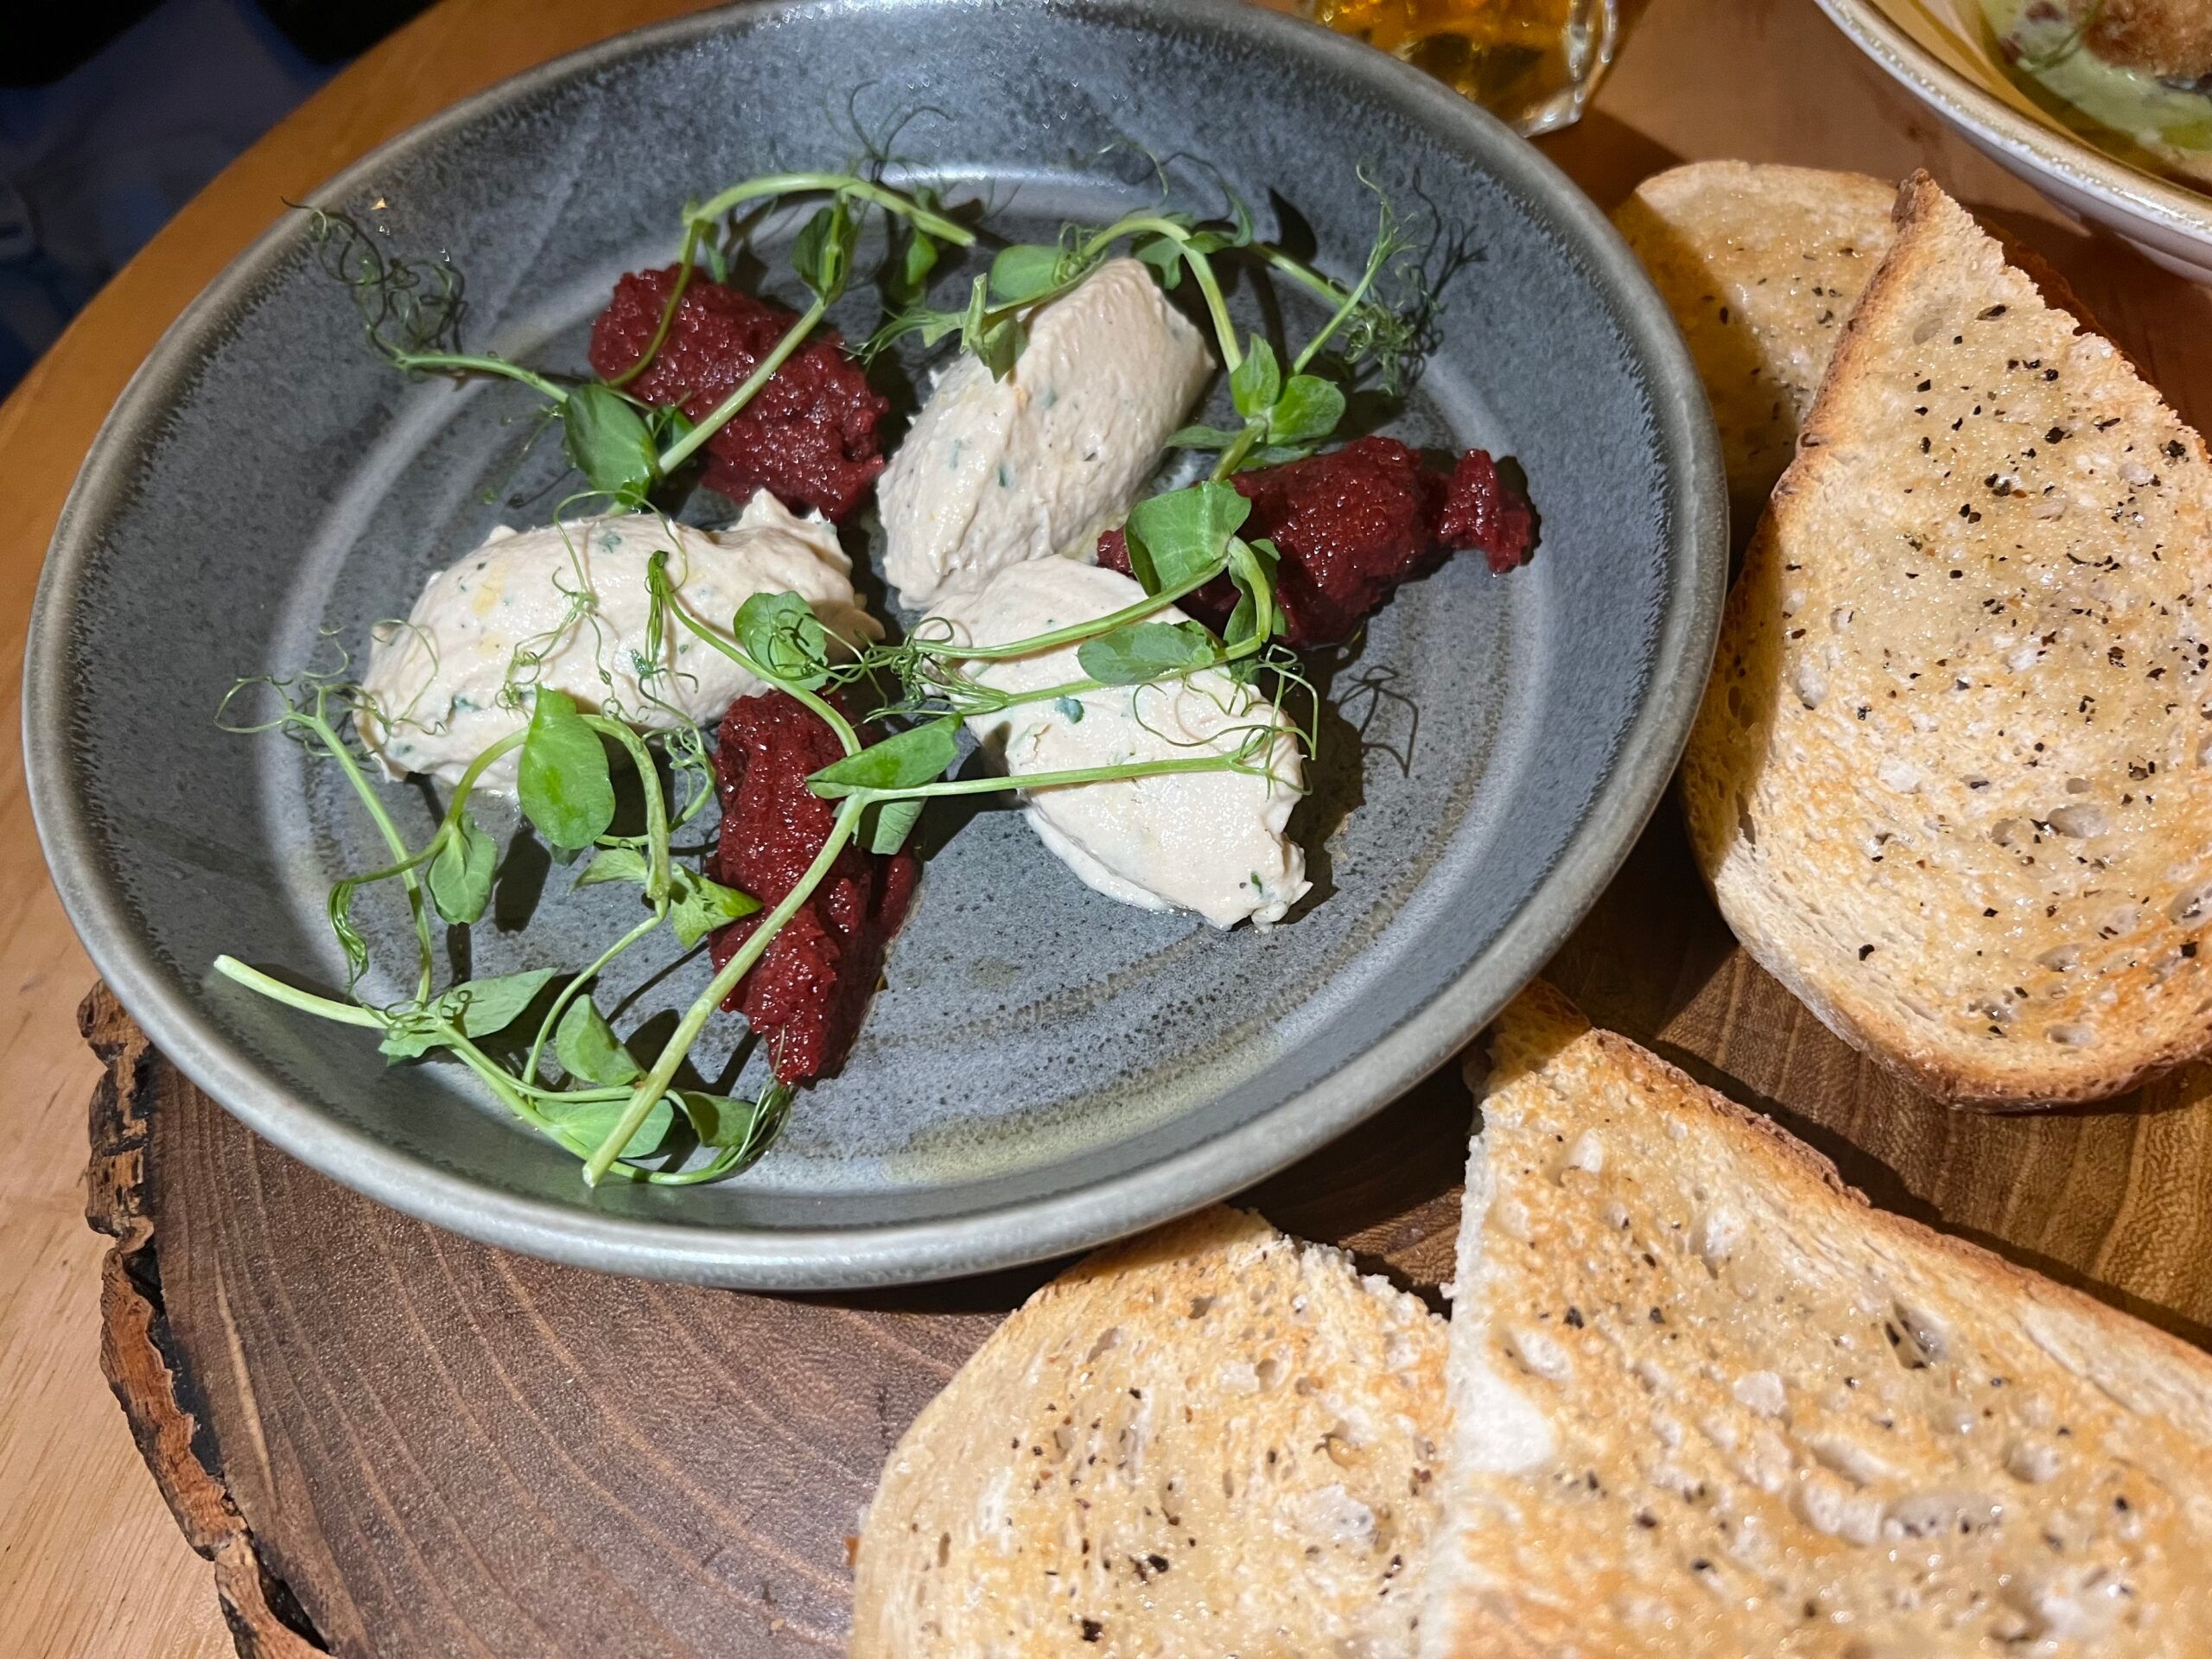 Smoked Mackerel Pâté with beetroot. Pub classics at The Basketmakers Arms